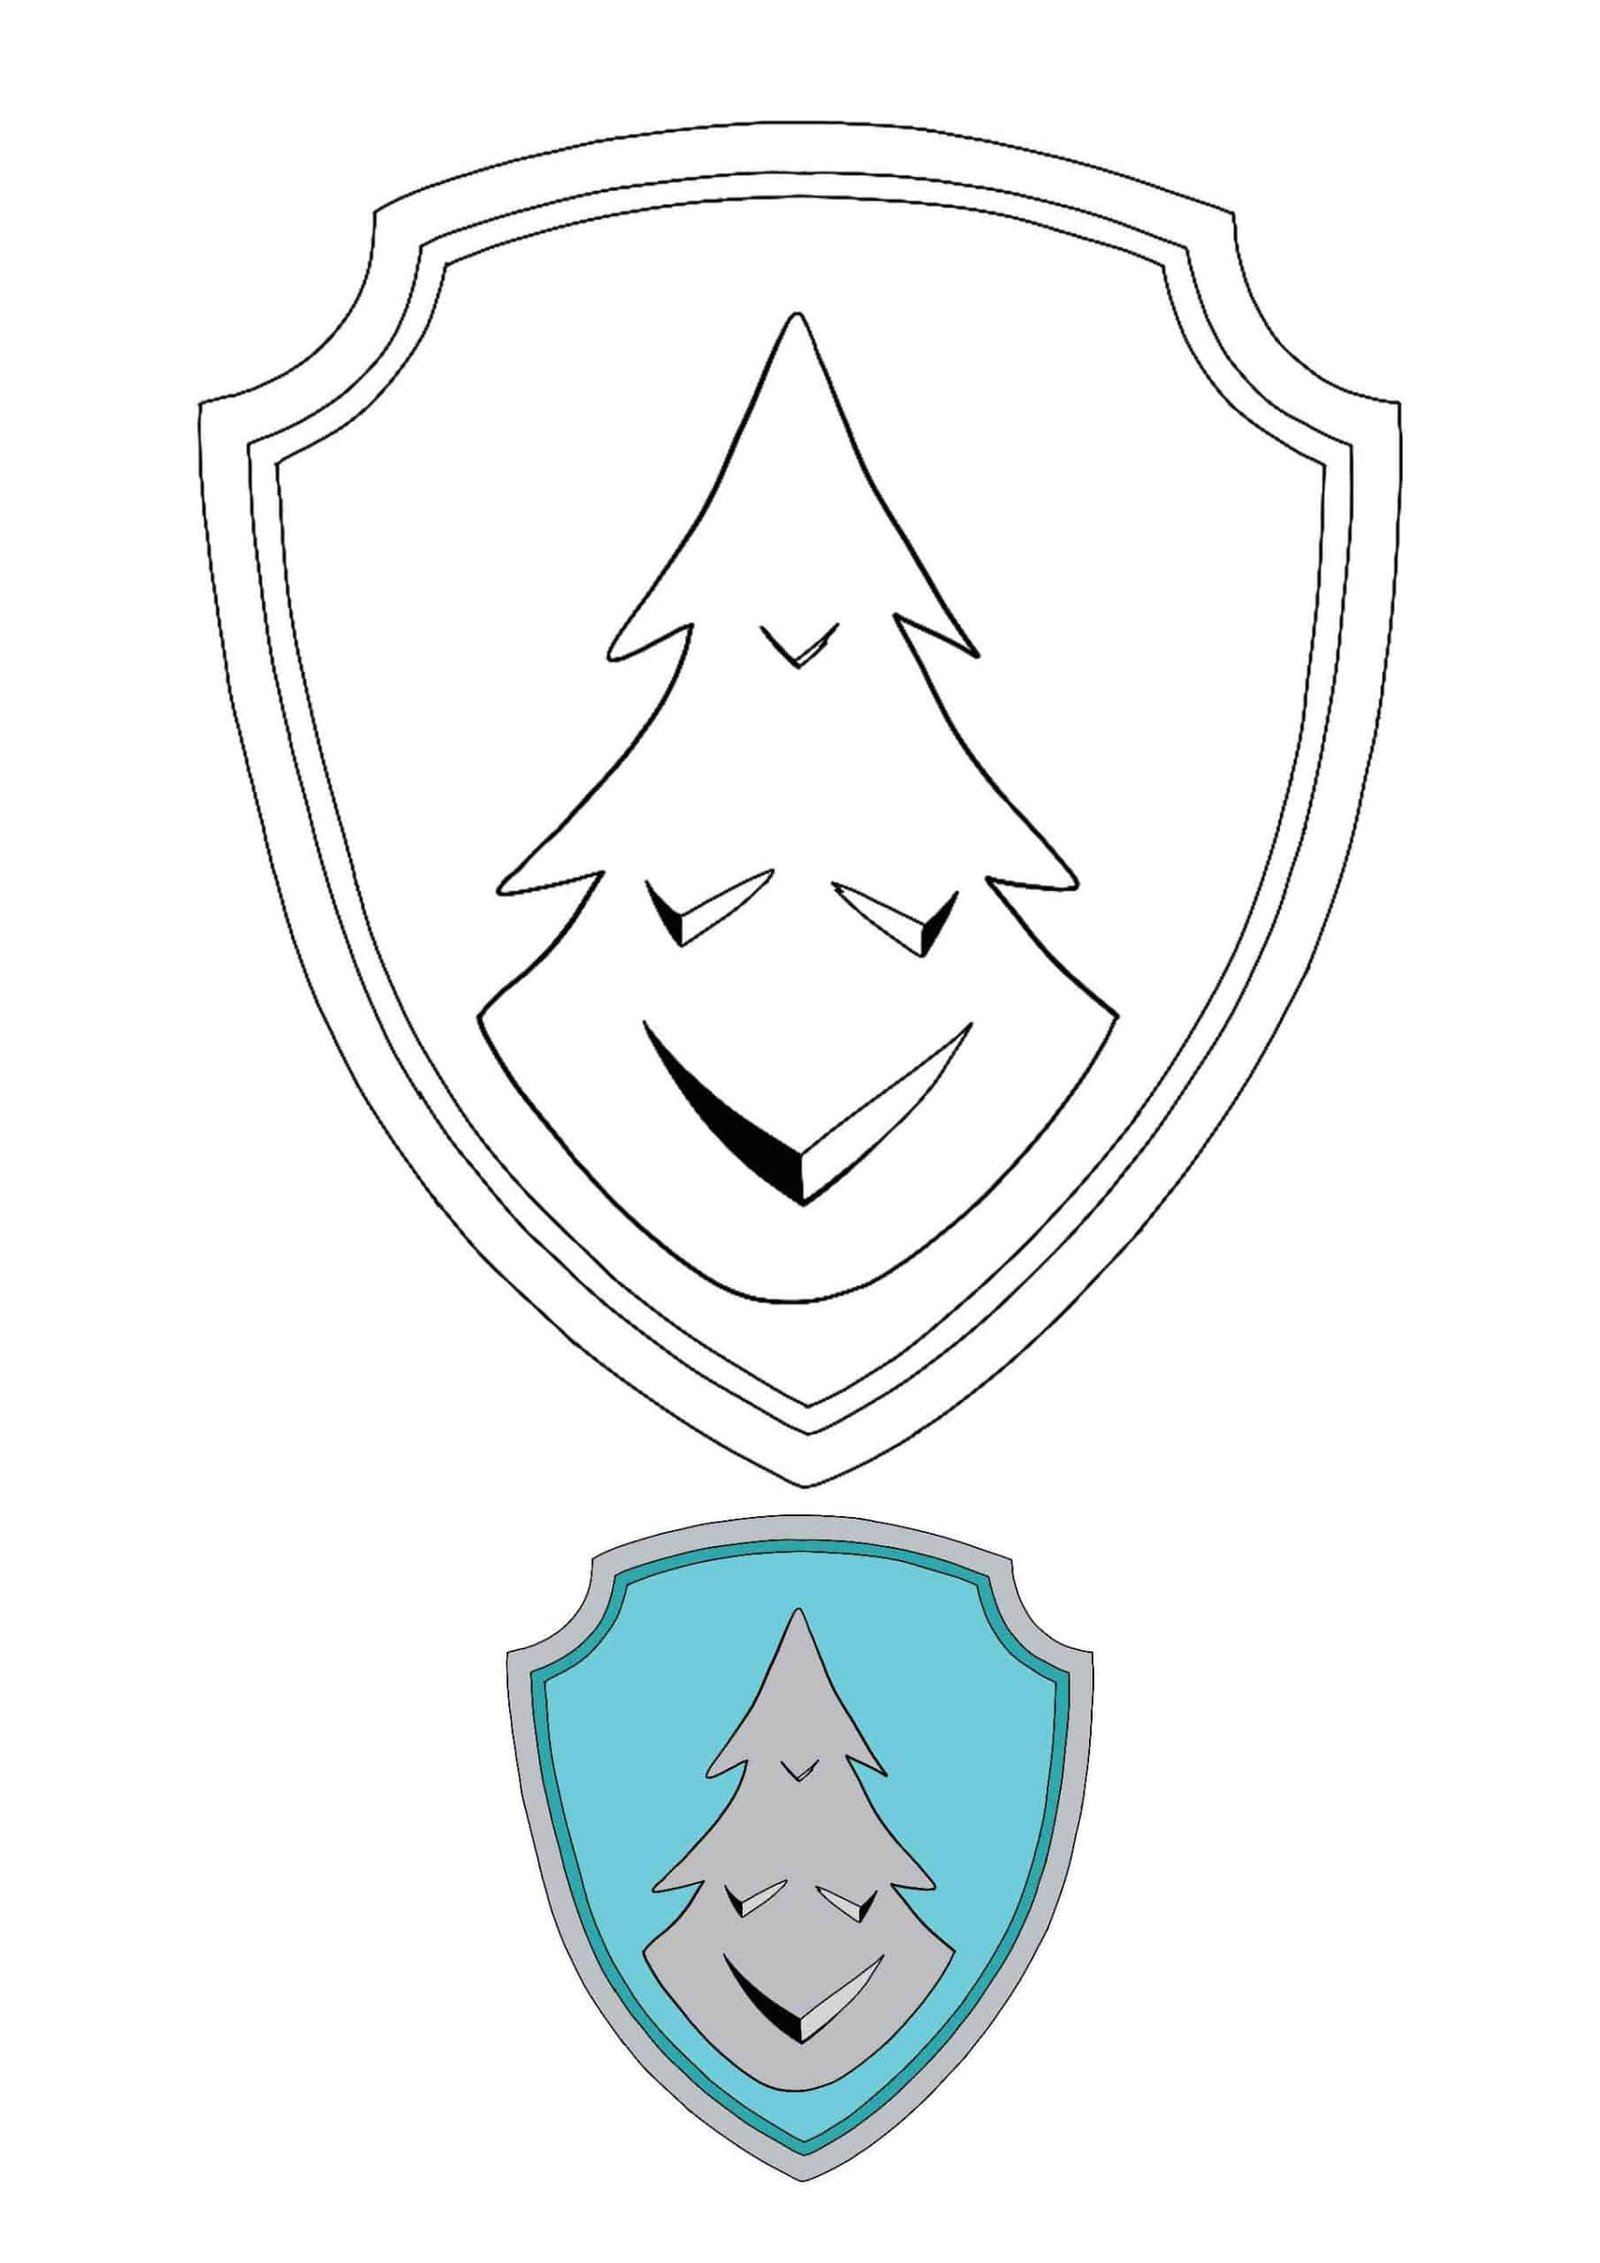 Paw Patrol Everest Badge coloring page with sample